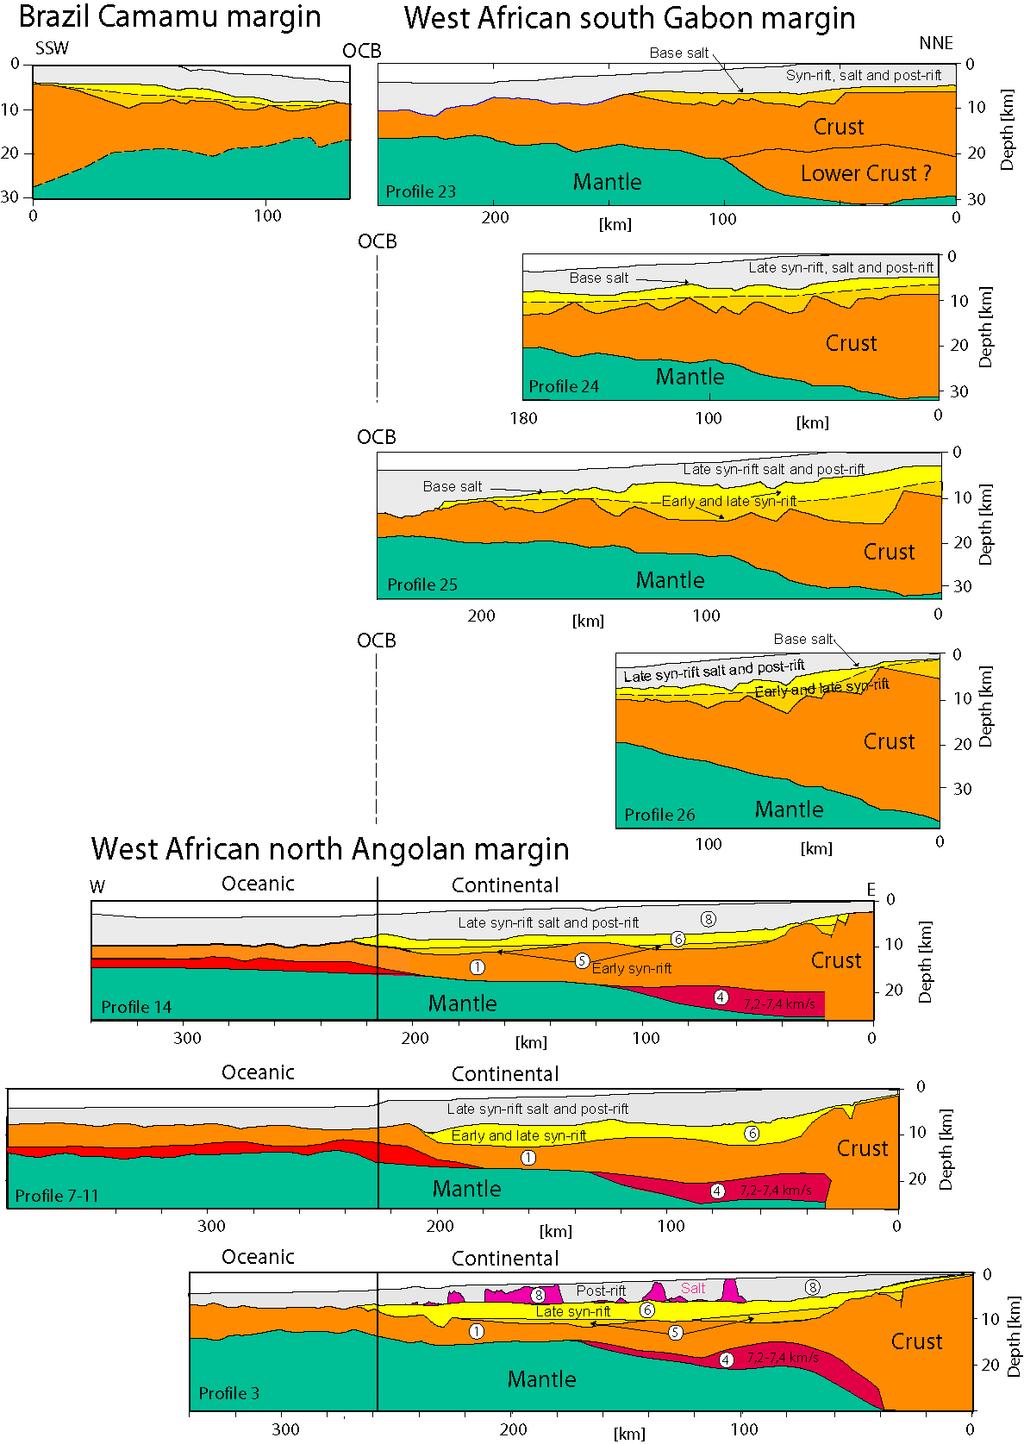 DR2008039 Huismans and Beaumont 2 Figure DR2. Crustal cross sections from the West African north Angolan to south Gabon margins (modified after1-3).